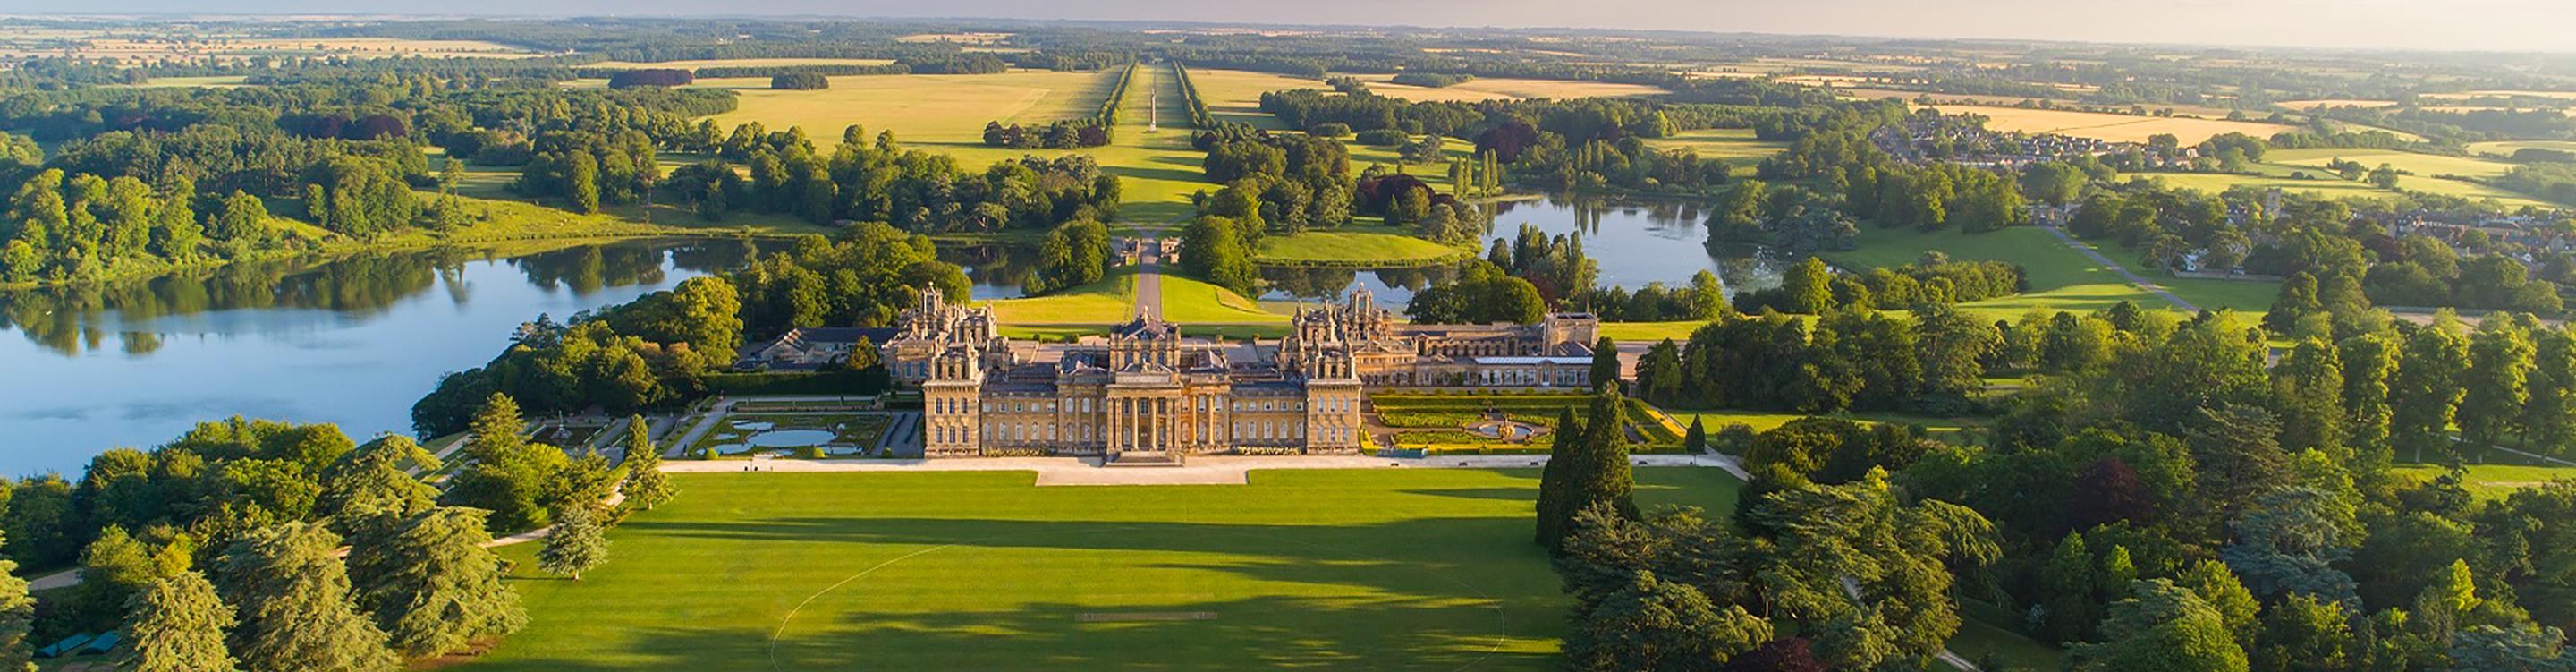 Long shot of Blenheim Palace on a fine summer day, with vibrant greenery framing the landscape surrounding the Palace.